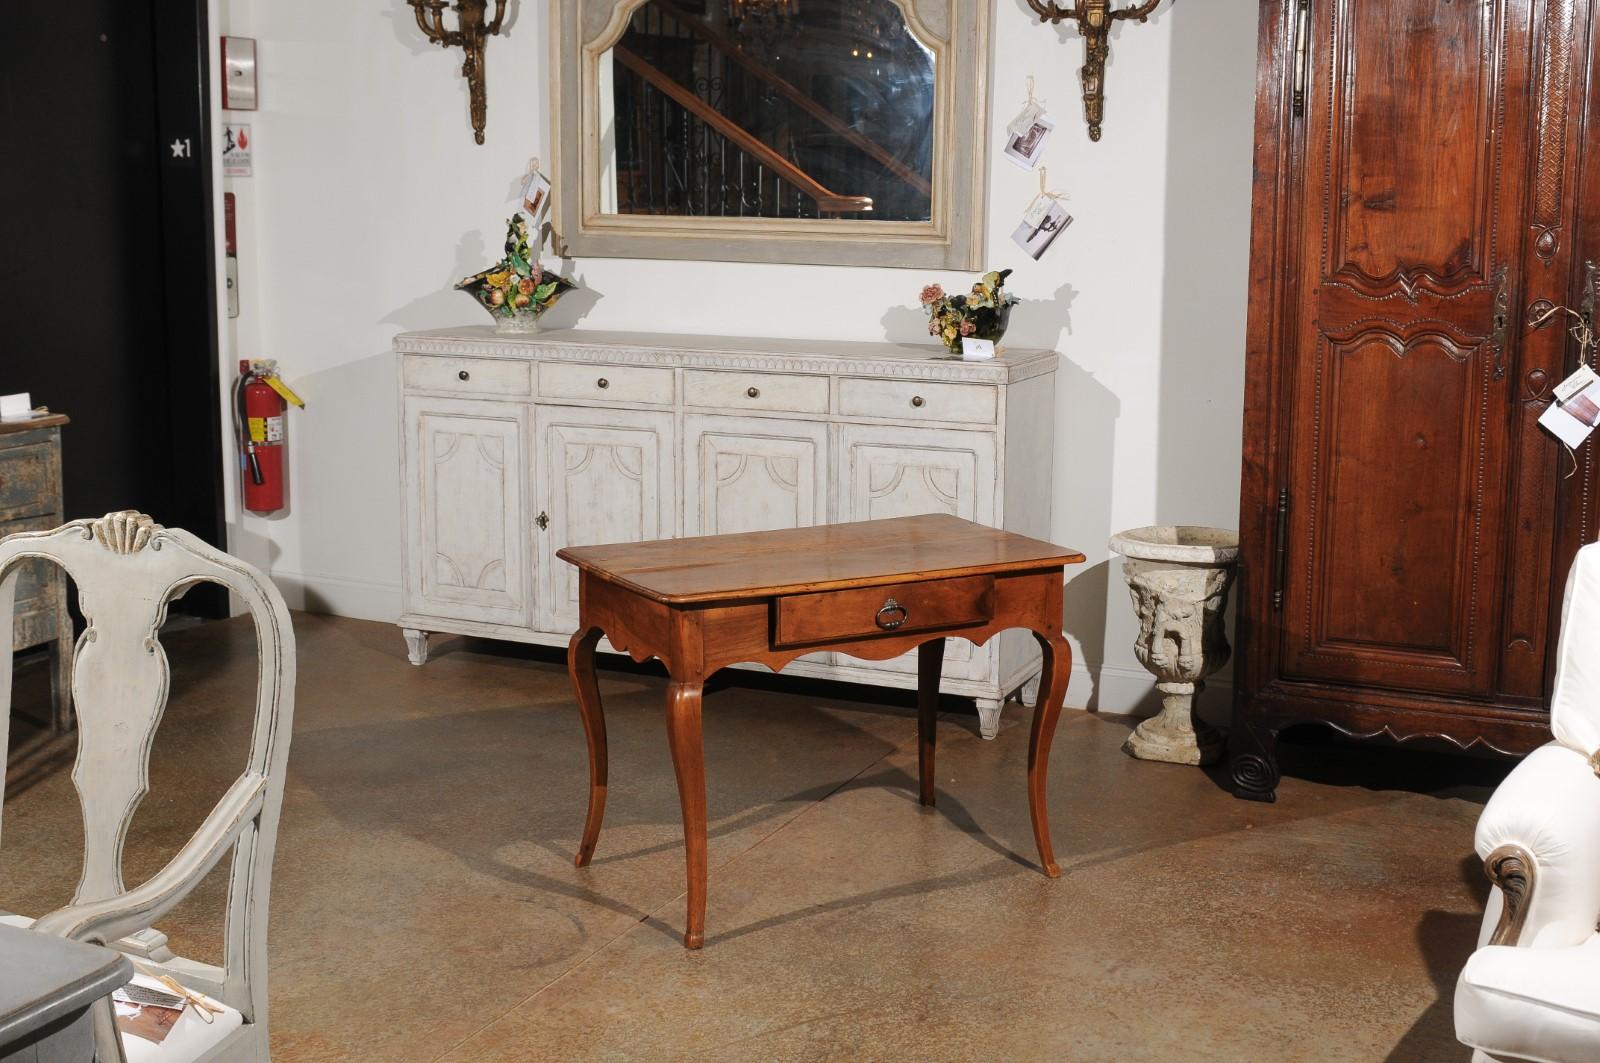 A French Period Louis XV walnut table from the mid-18th century, with single drawer, scalloped apron and cabriole legs. Born in France during the reign of Louis XV nicknamed 